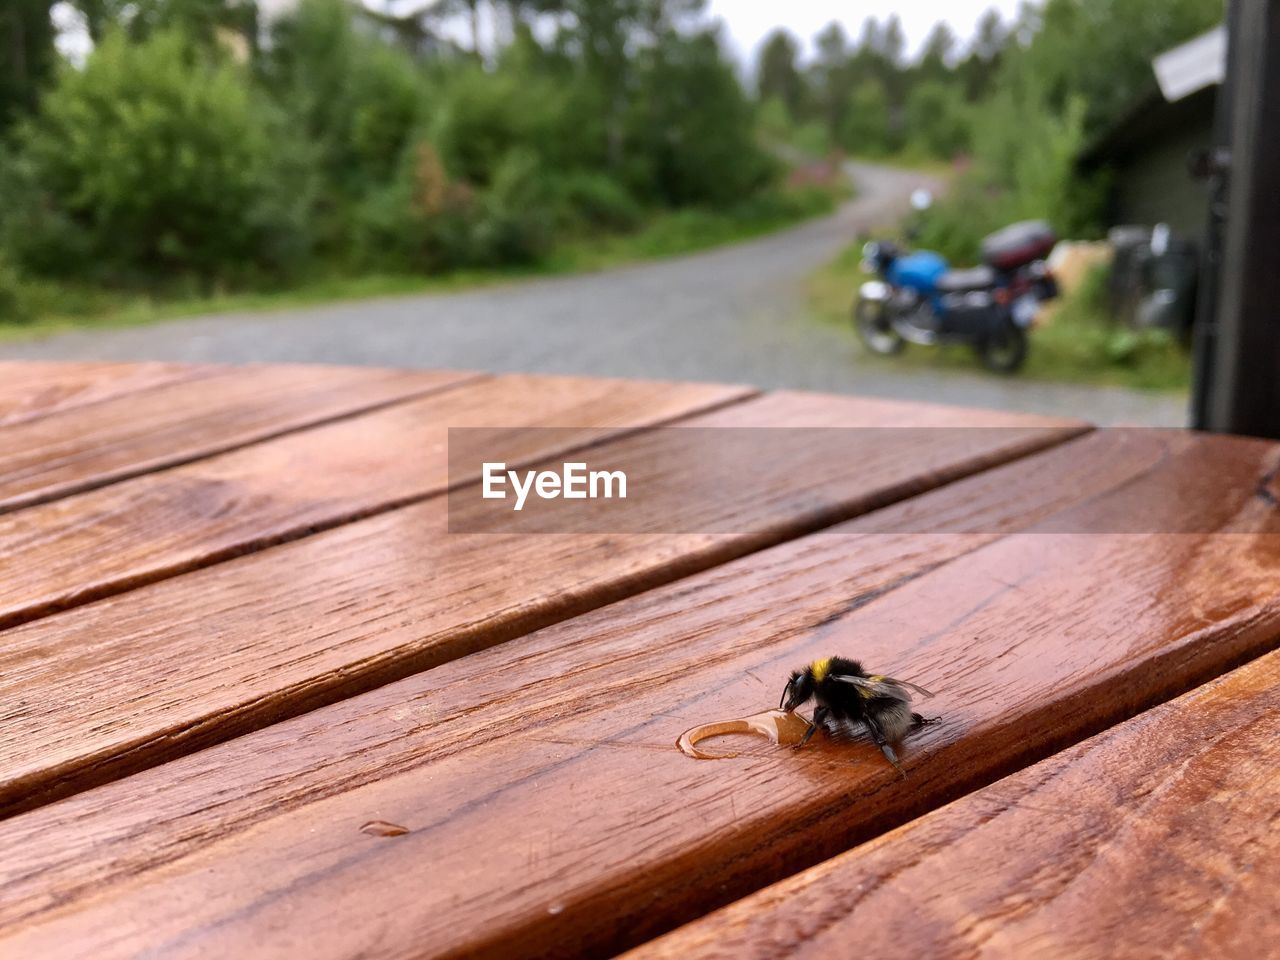 INSECT ON WOODEN TABLE